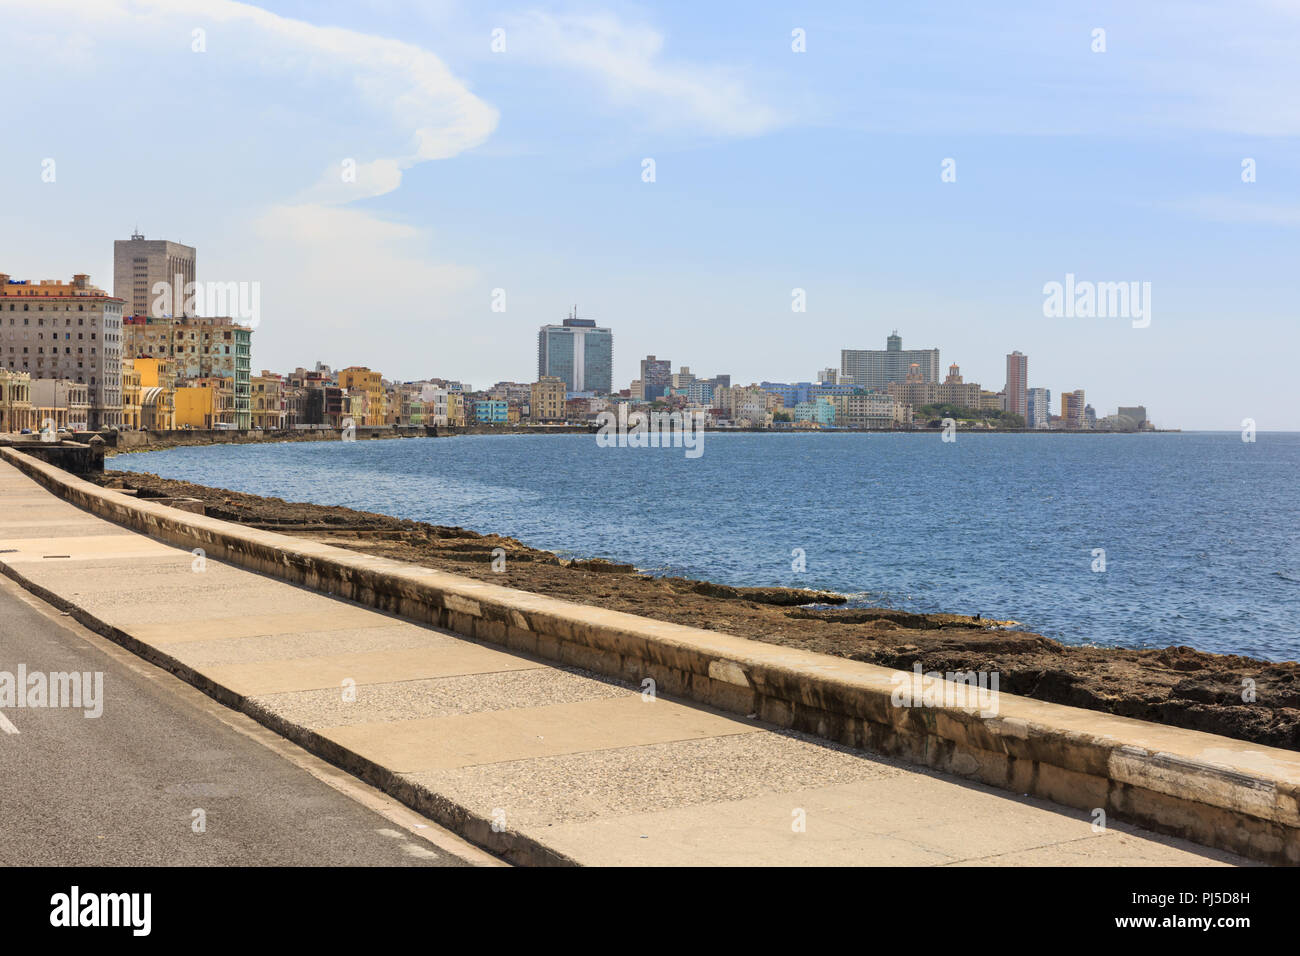 Malecon, seafront road and boulevard in Havana, Cuba Stock Photo